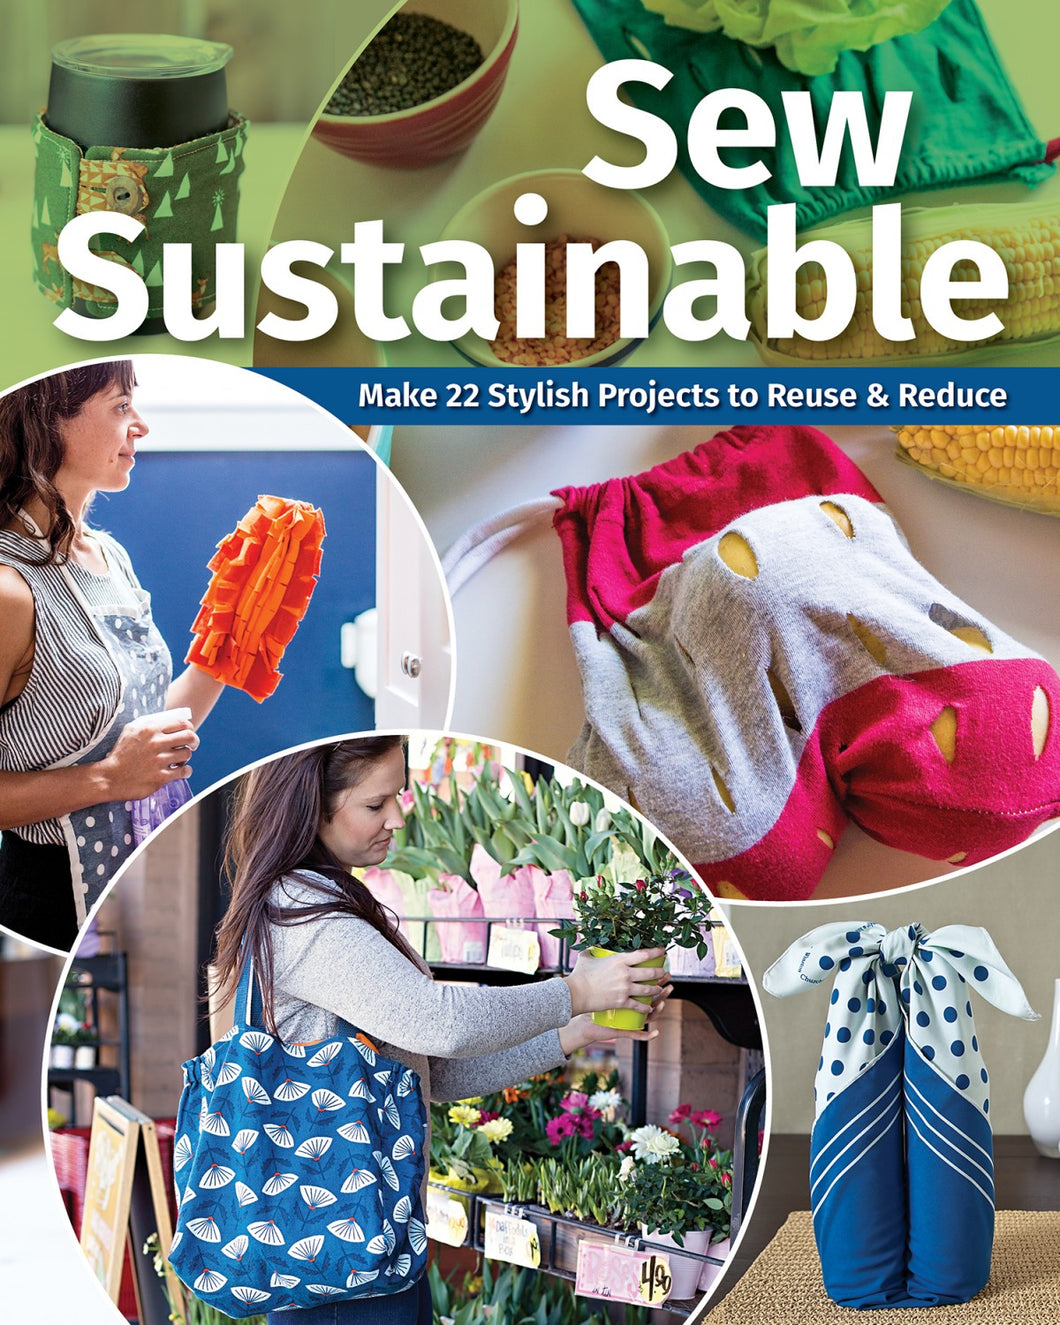 Sew Sustainable Make 22+ Stylish Projects to Reuse & Reduce